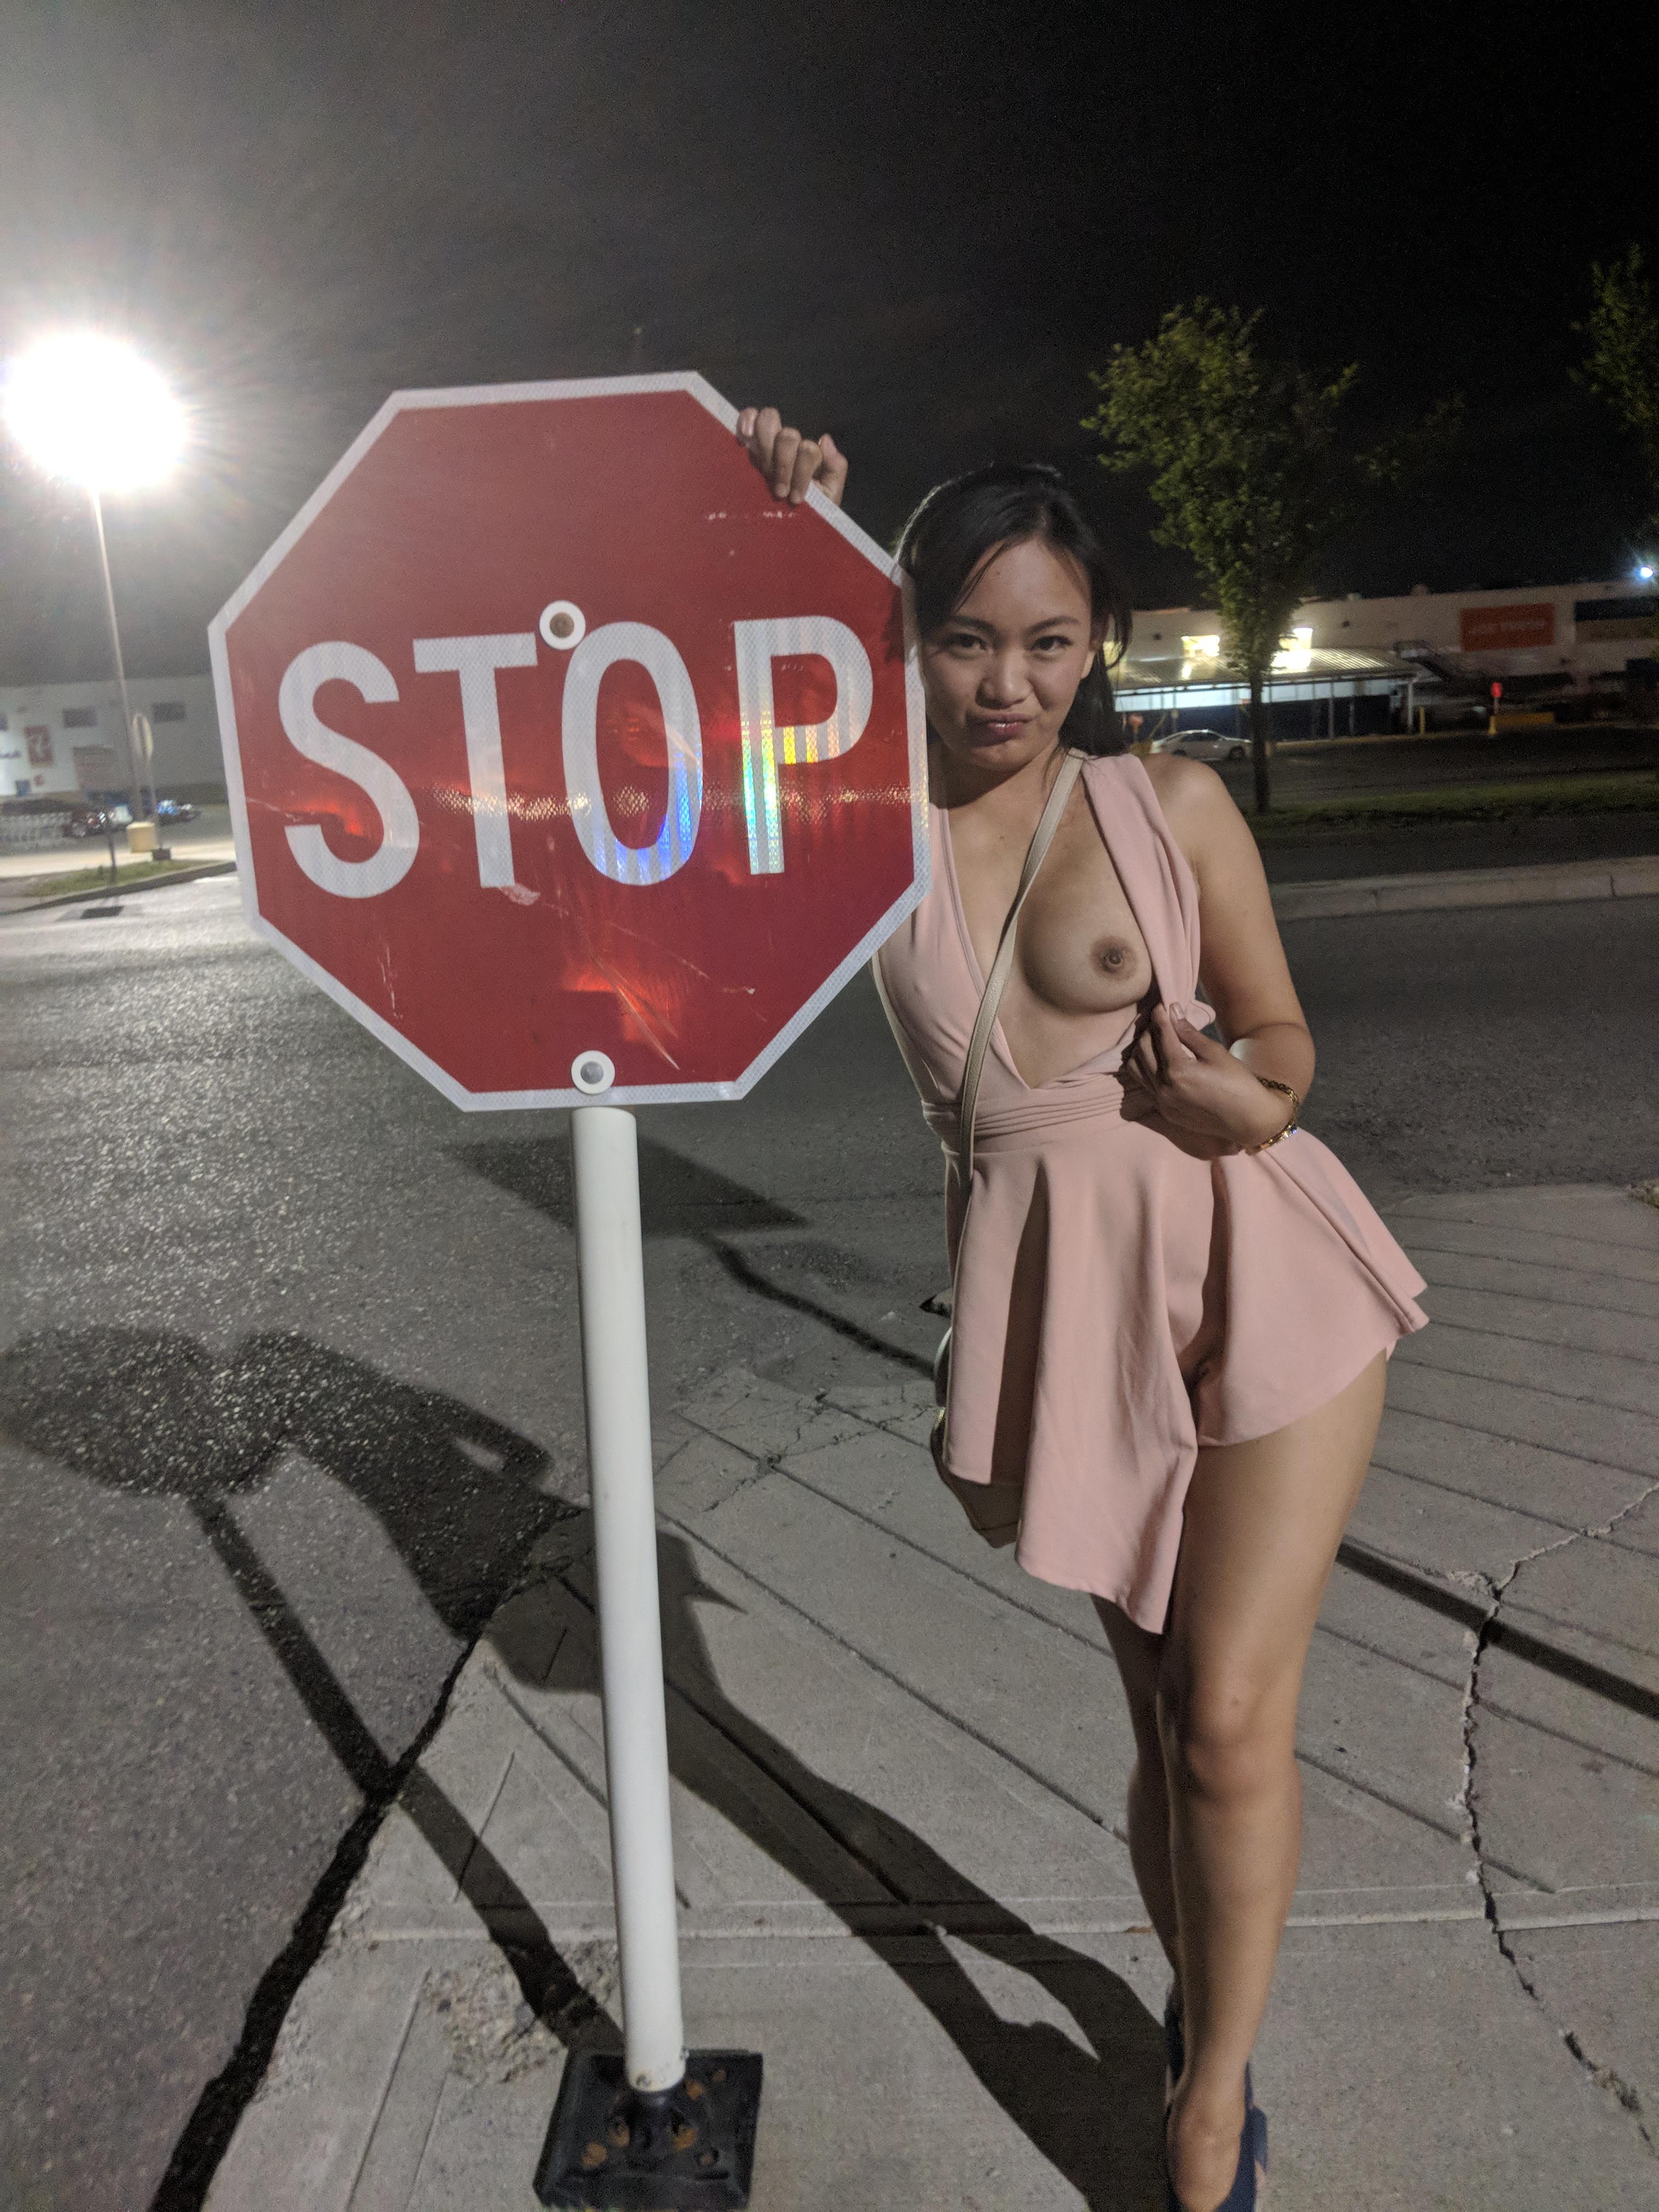 A stop sign you should really stop at